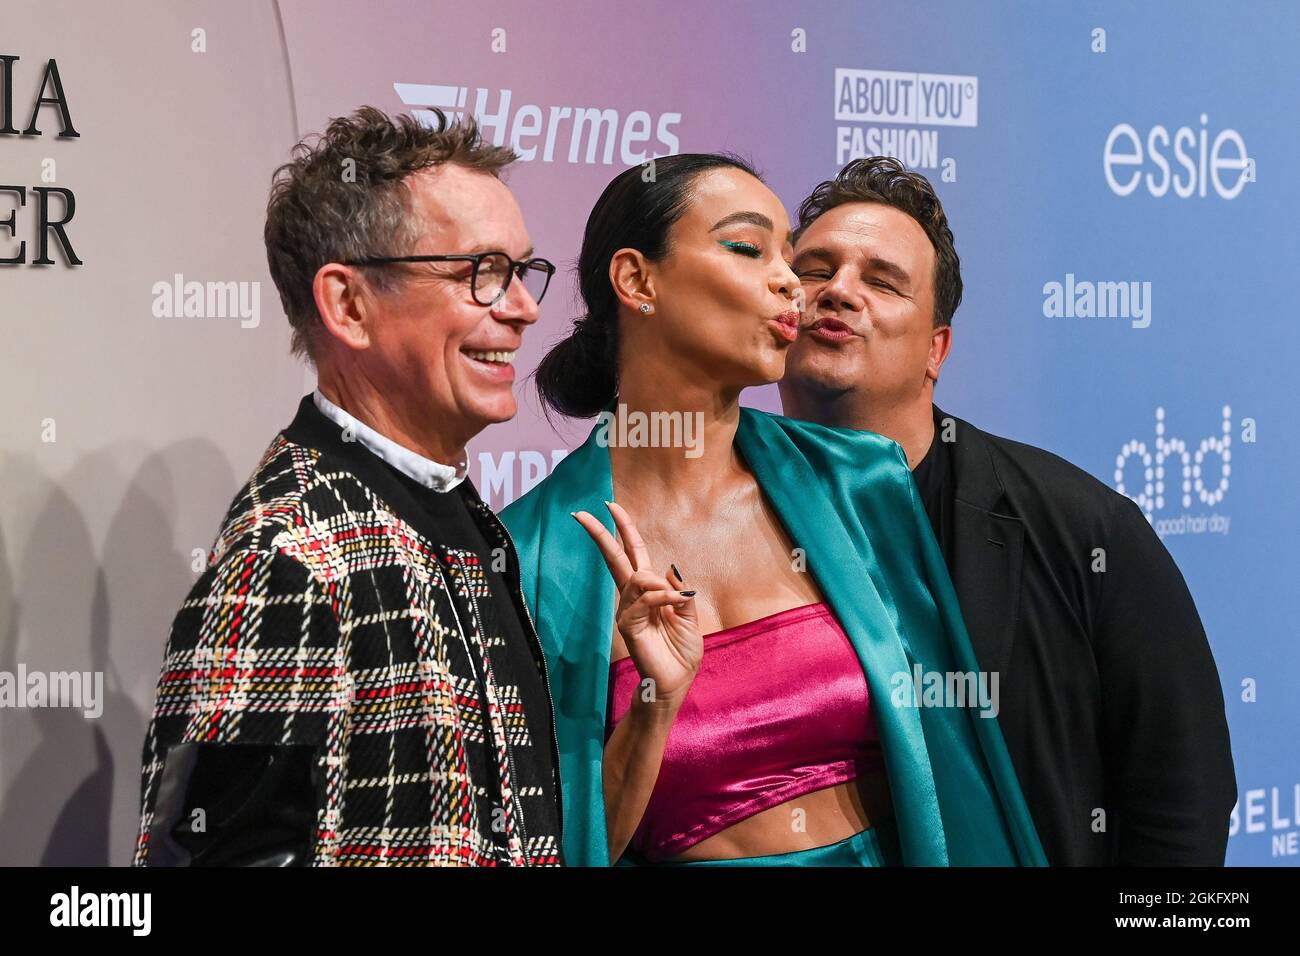 Berlin, Germany. 14th Sep, 2021. Frank Mutters (l-r), Verona Pooth and Guido Maria Kretschmer arrive at the Guido Maria Kretschmer Show at Kraftwerk. About You, or Re-Fashion Week, has been part of Berlin Fashion Week since 2021. About You Fashion Week runs from 11 to 15 September 2021. Credit: Jens Kalaene/dpa/Alamy Live News Stock Photo